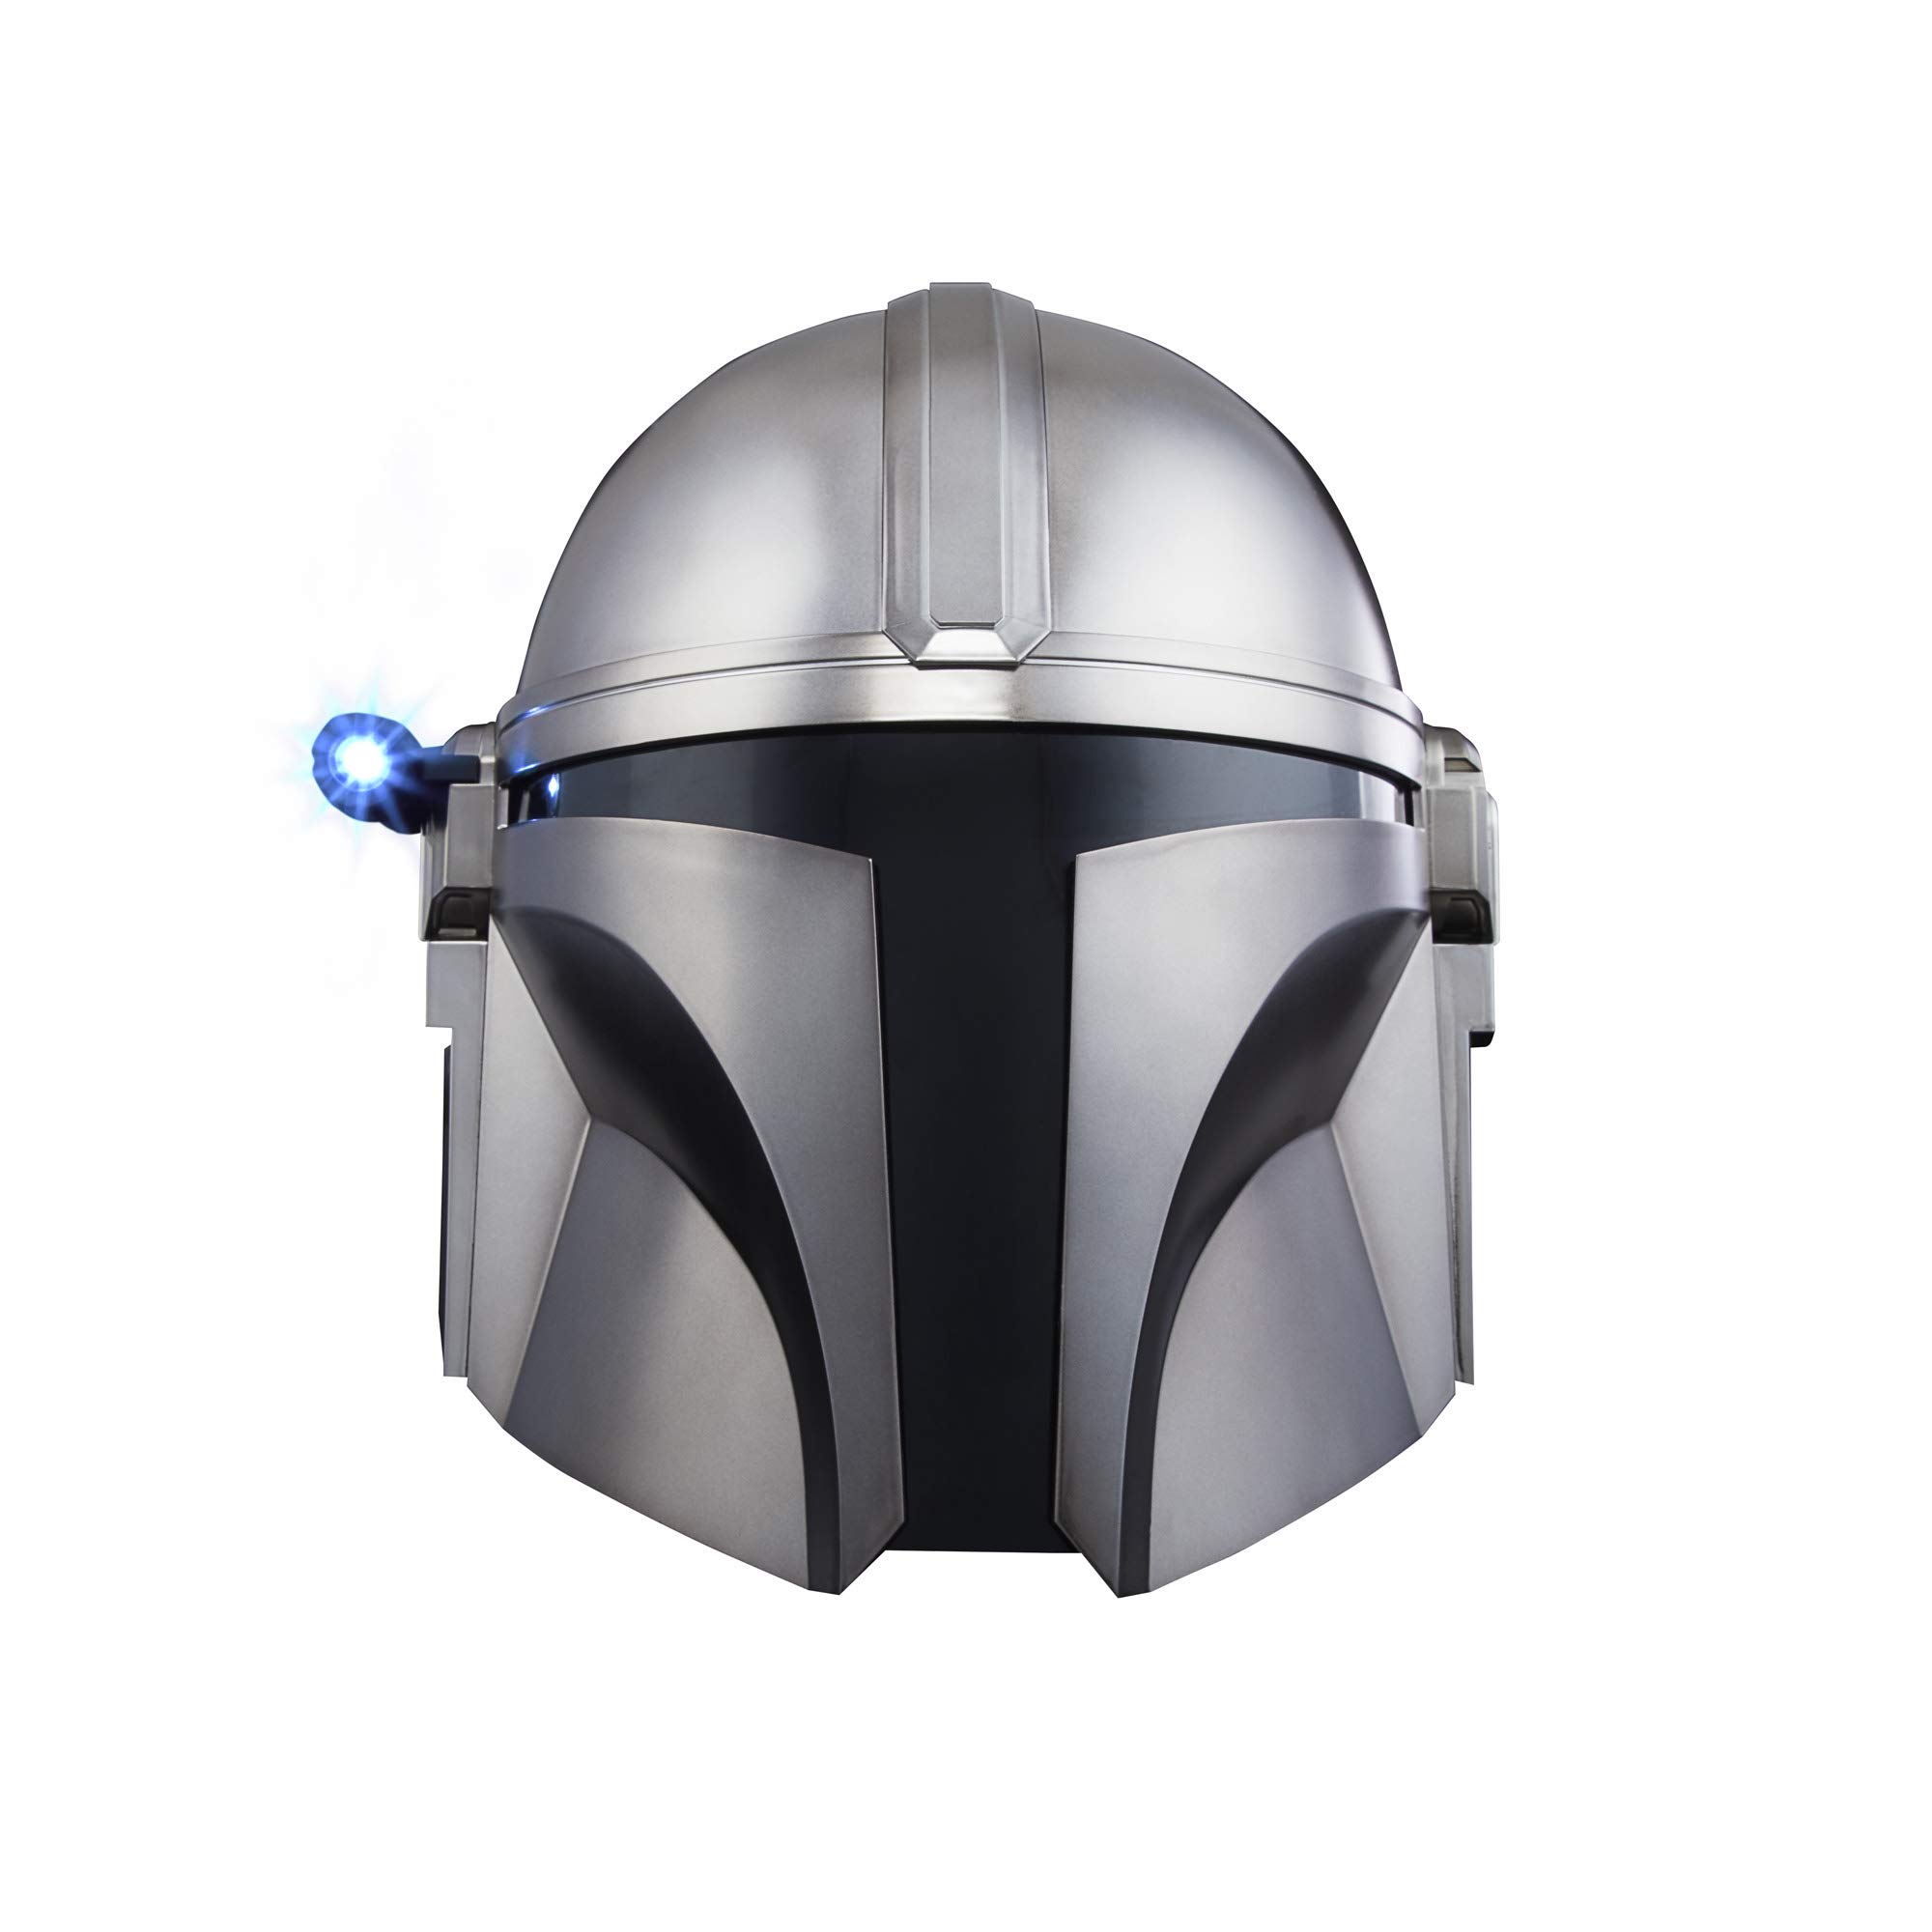 Hasbro STAR WARS The Black Series The Mandalorian Premium Electronic Helmet Roleplay Collectible, Toys for Kids Ages 14 and Up